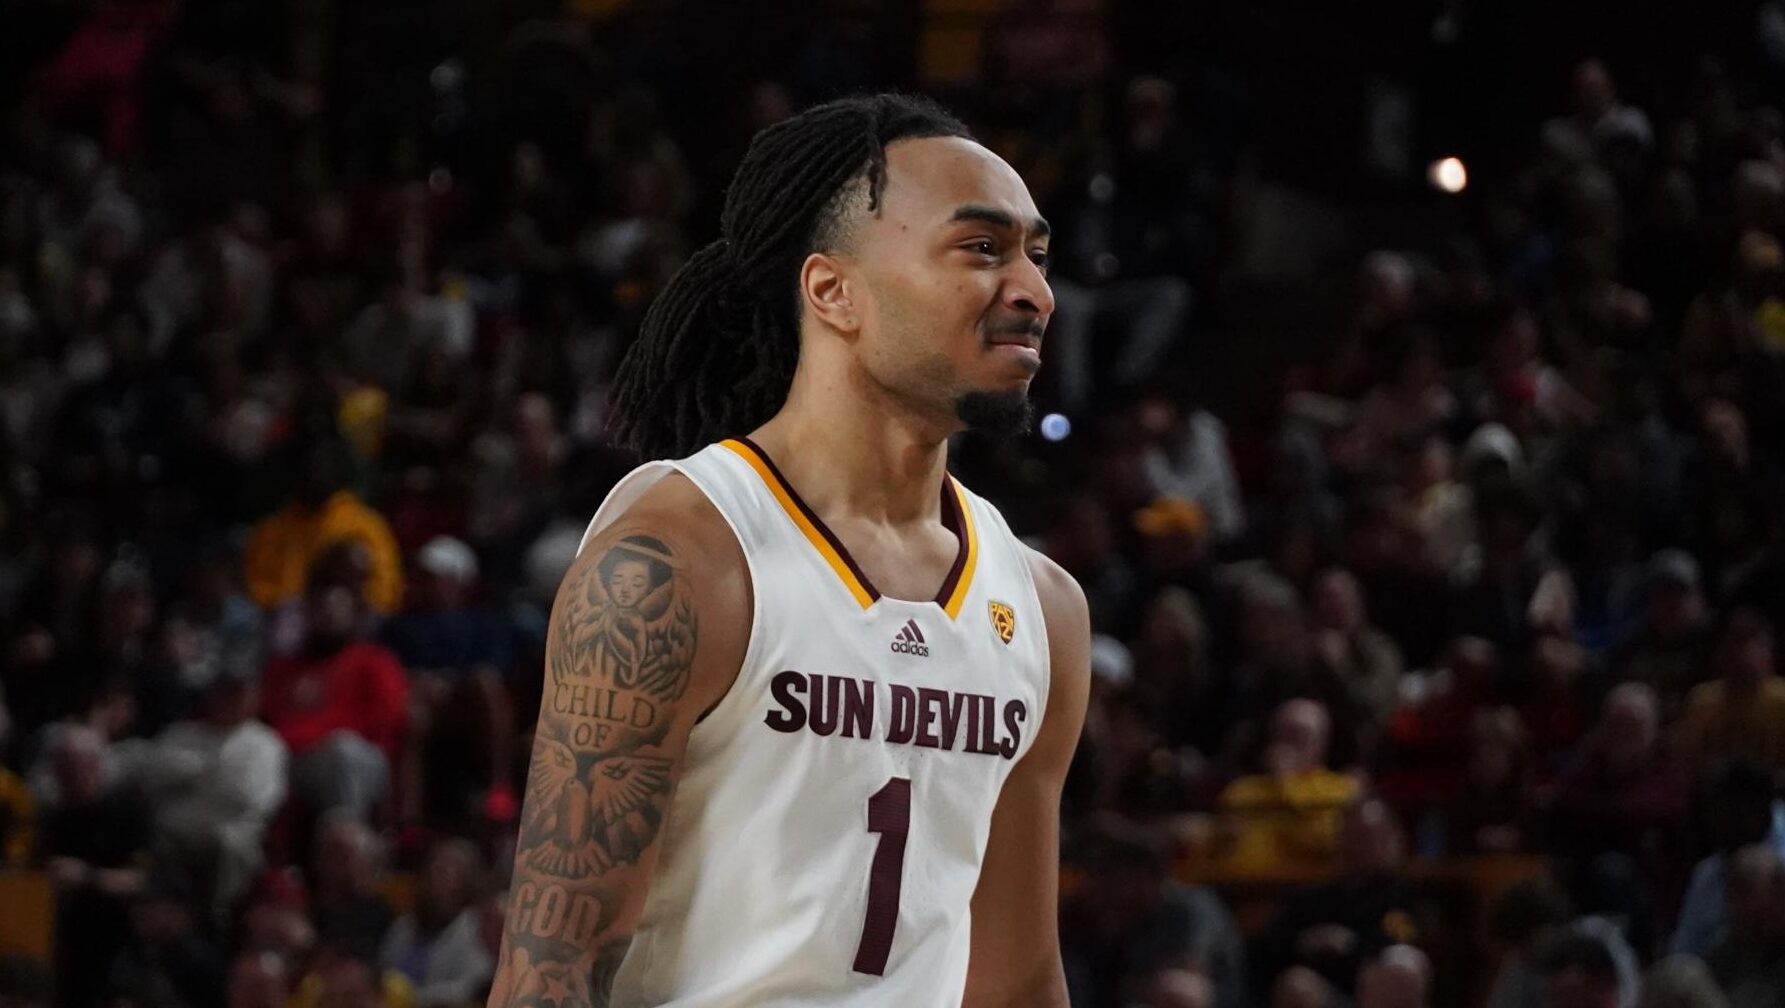 Arizona State basketball runs all over USC in blowout win